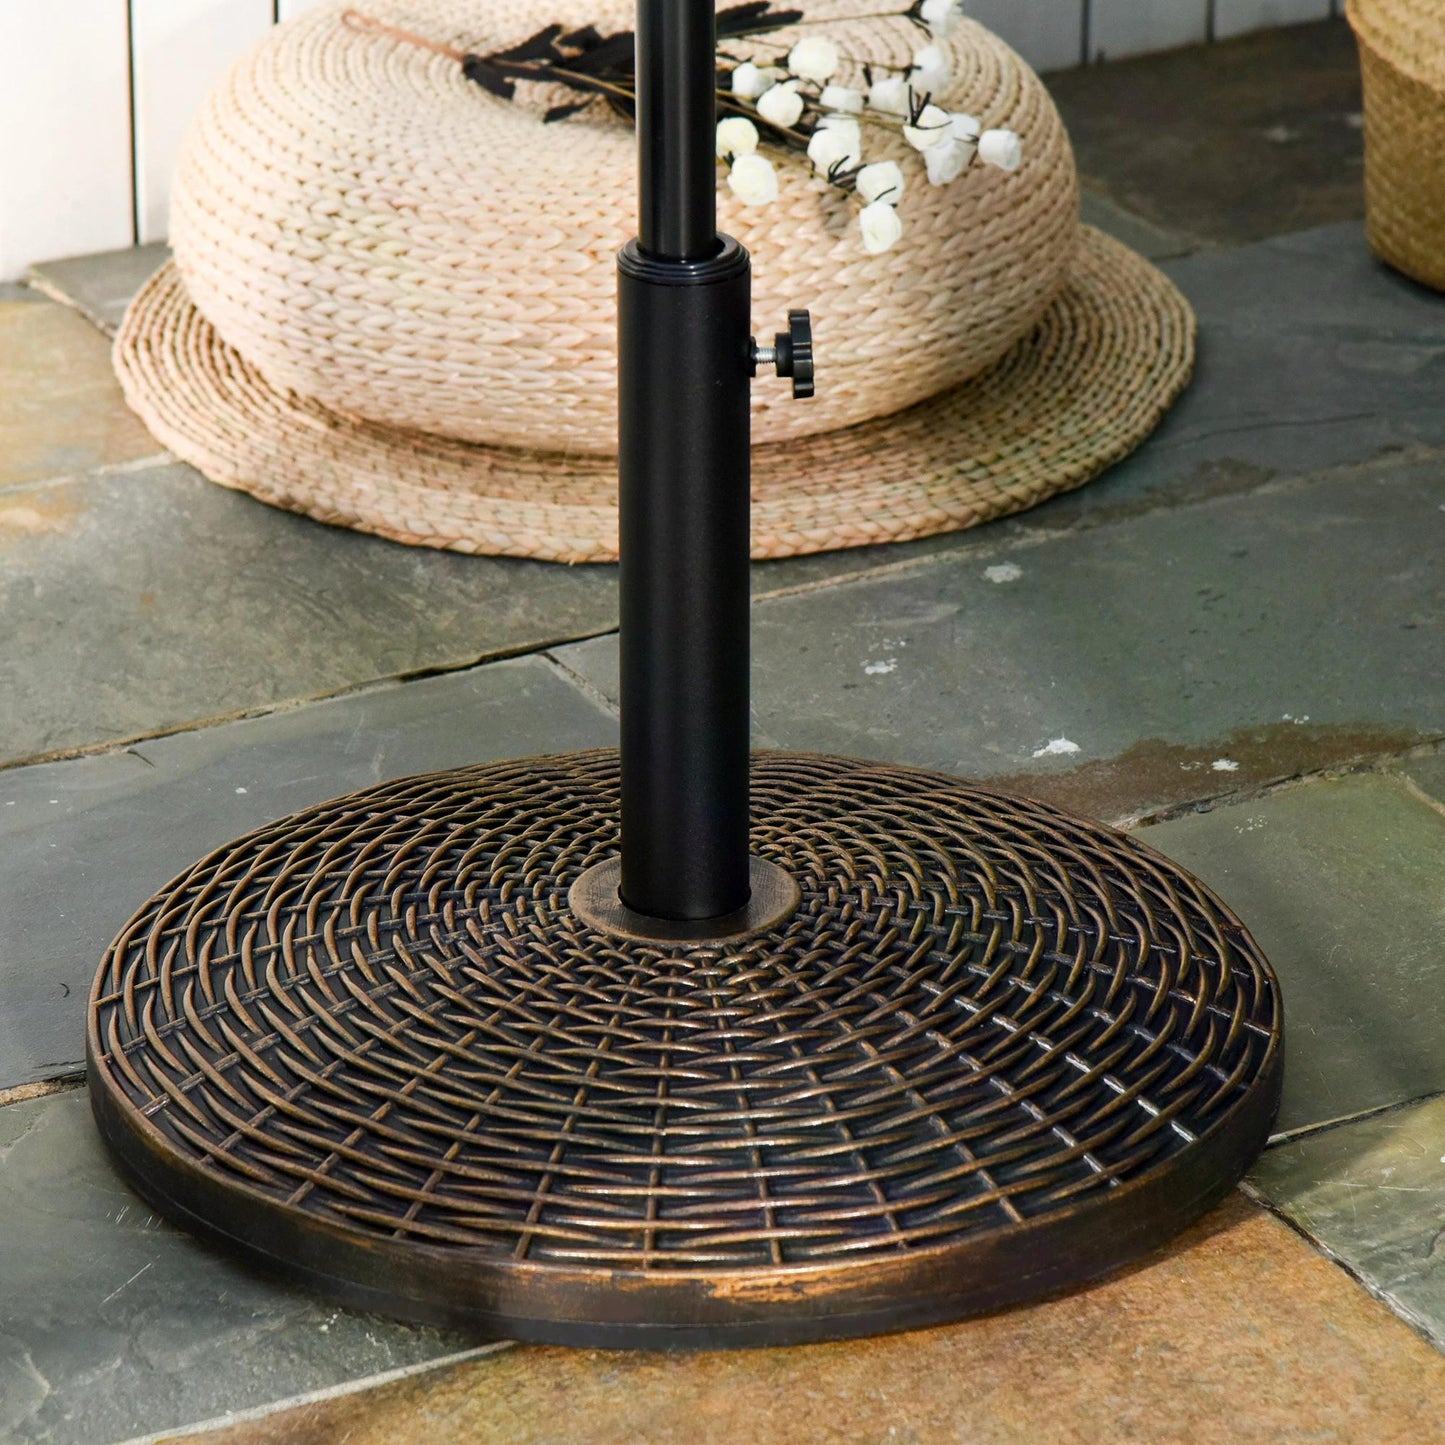 Outsunny Patio Parasol Base: Weighted 25kg Stand for Outdoor Umbrellas, Weather-Resistant, Jet Black